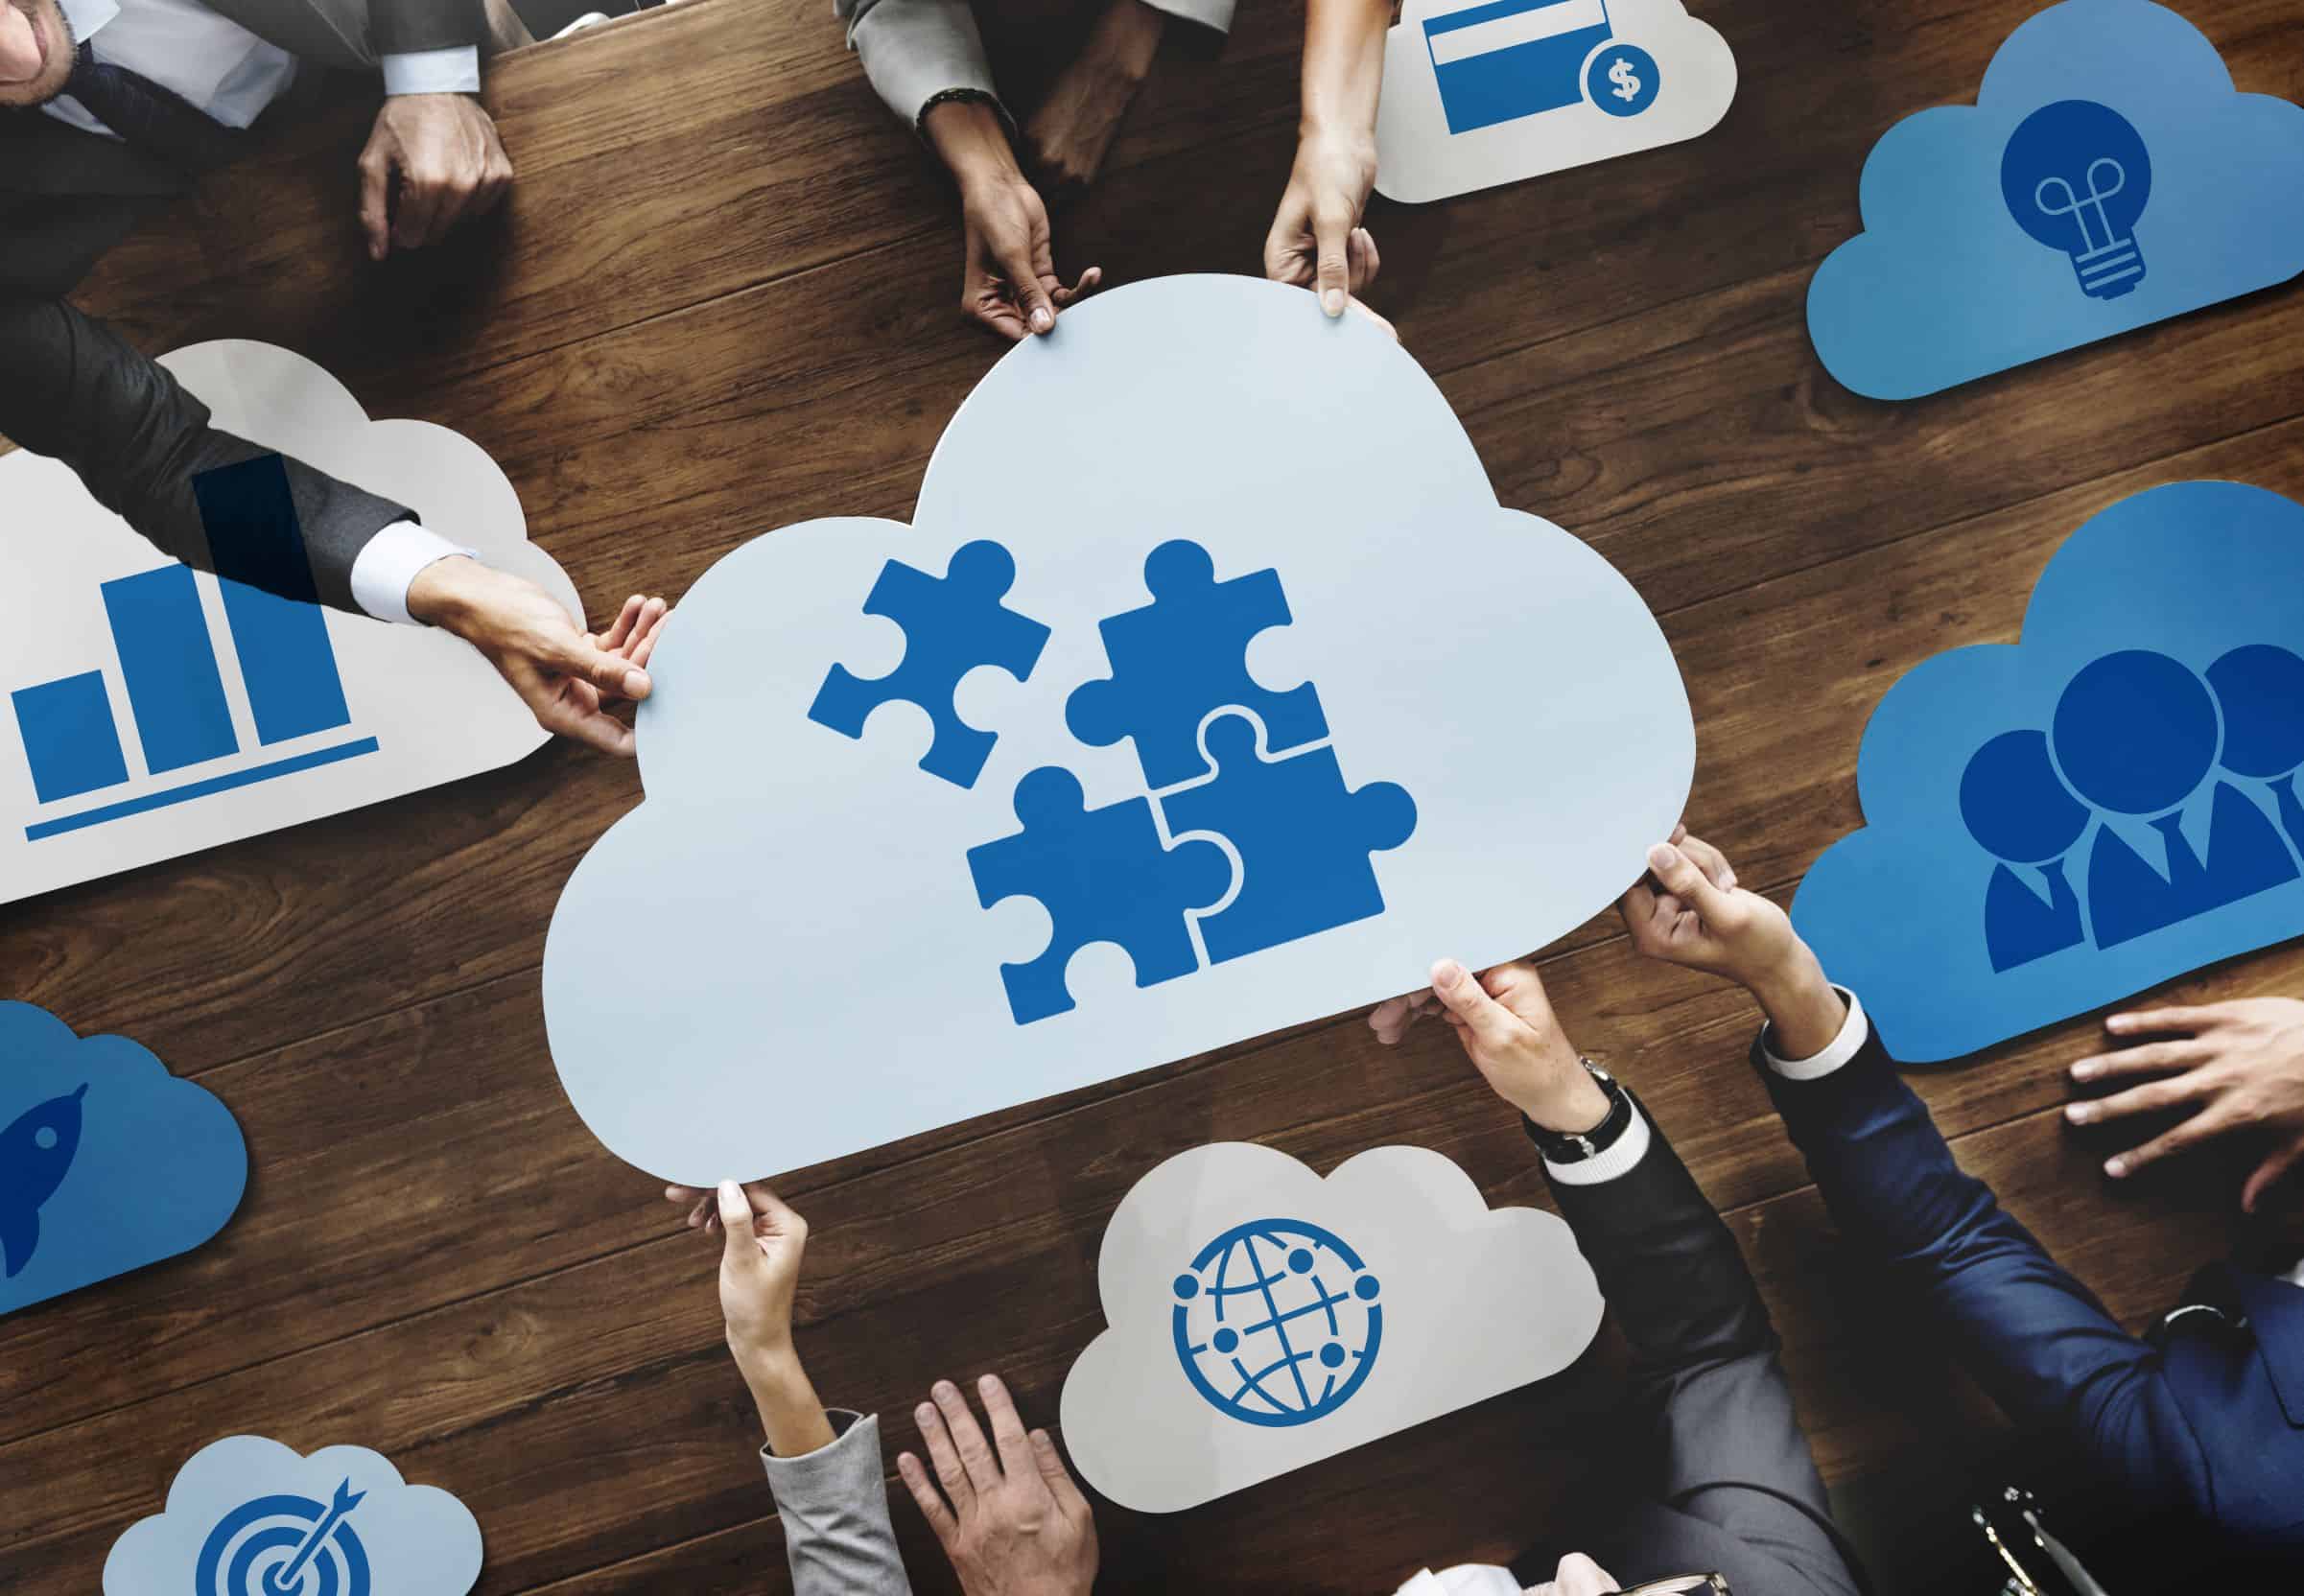 What Does it Mean to Be a "Cloud Computing Company" in 2019?